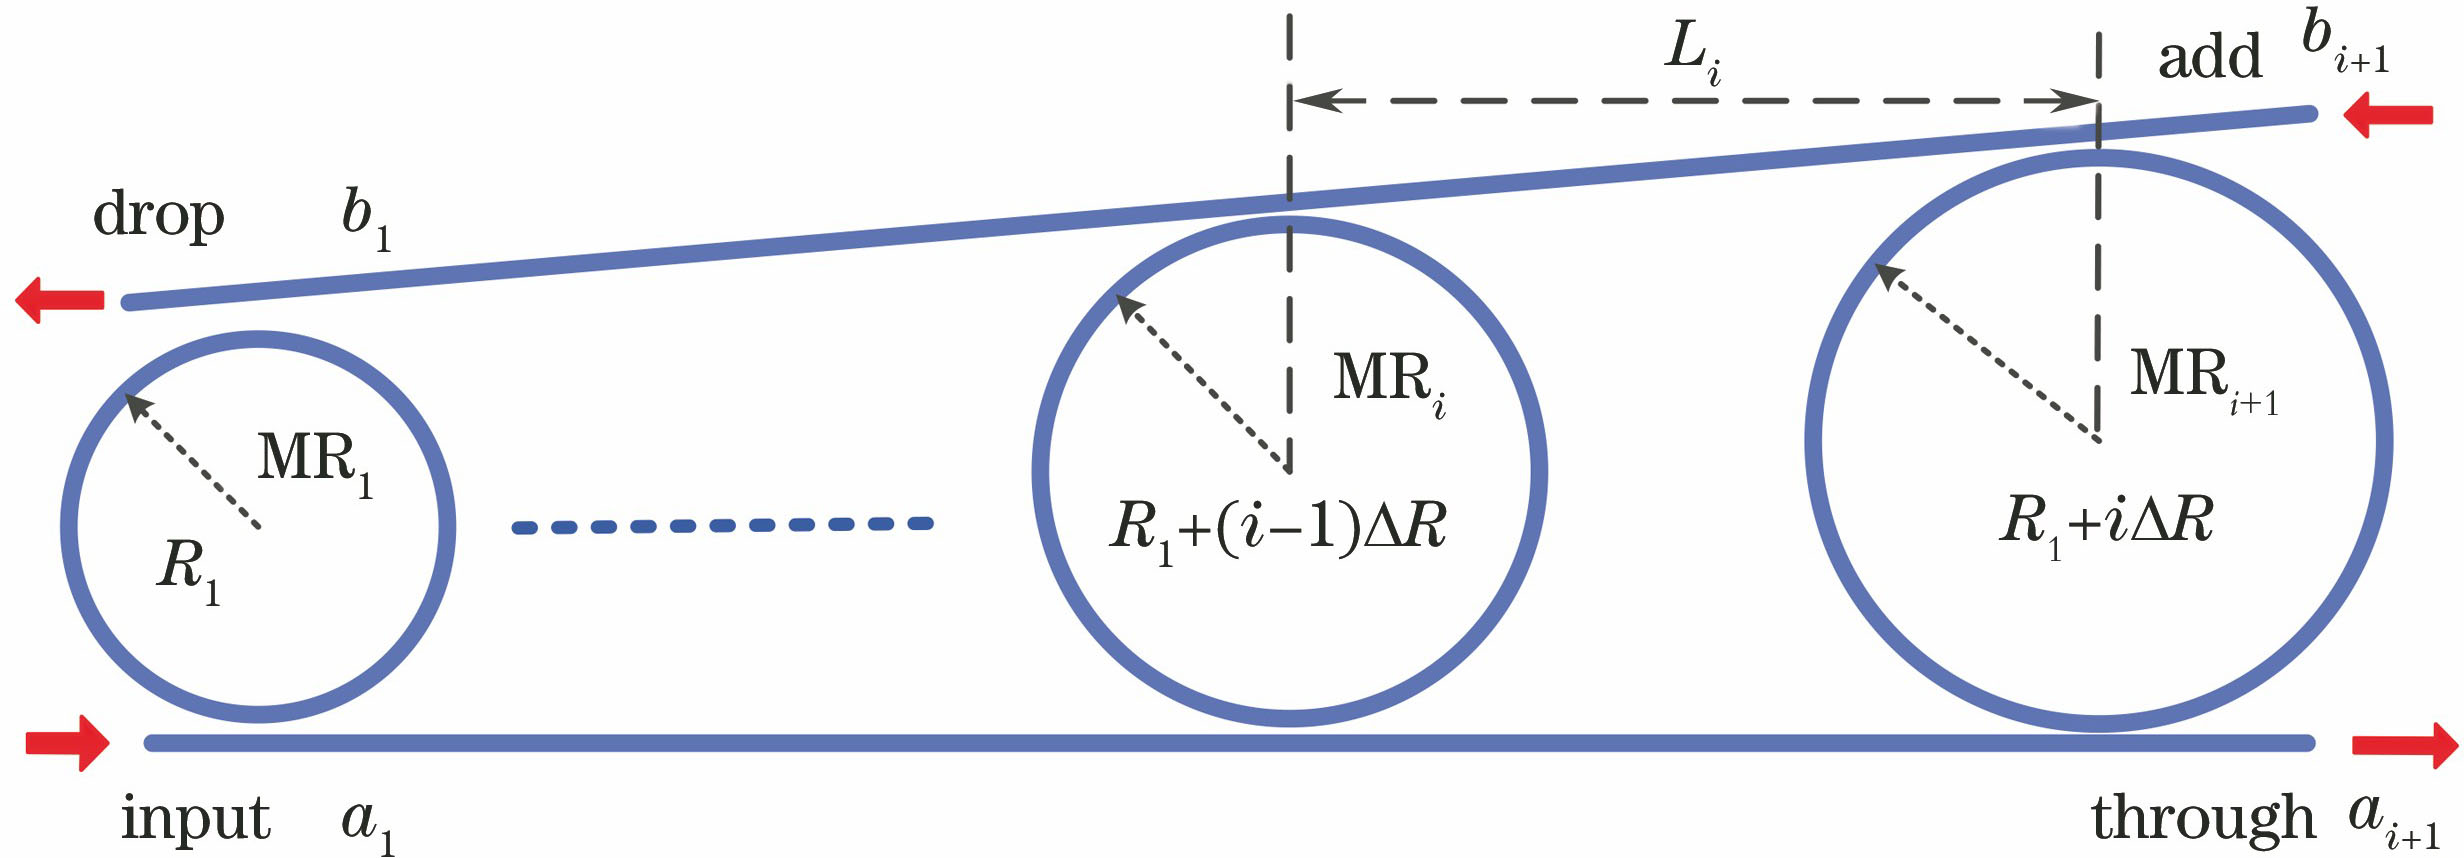 Schematic of improved microring array